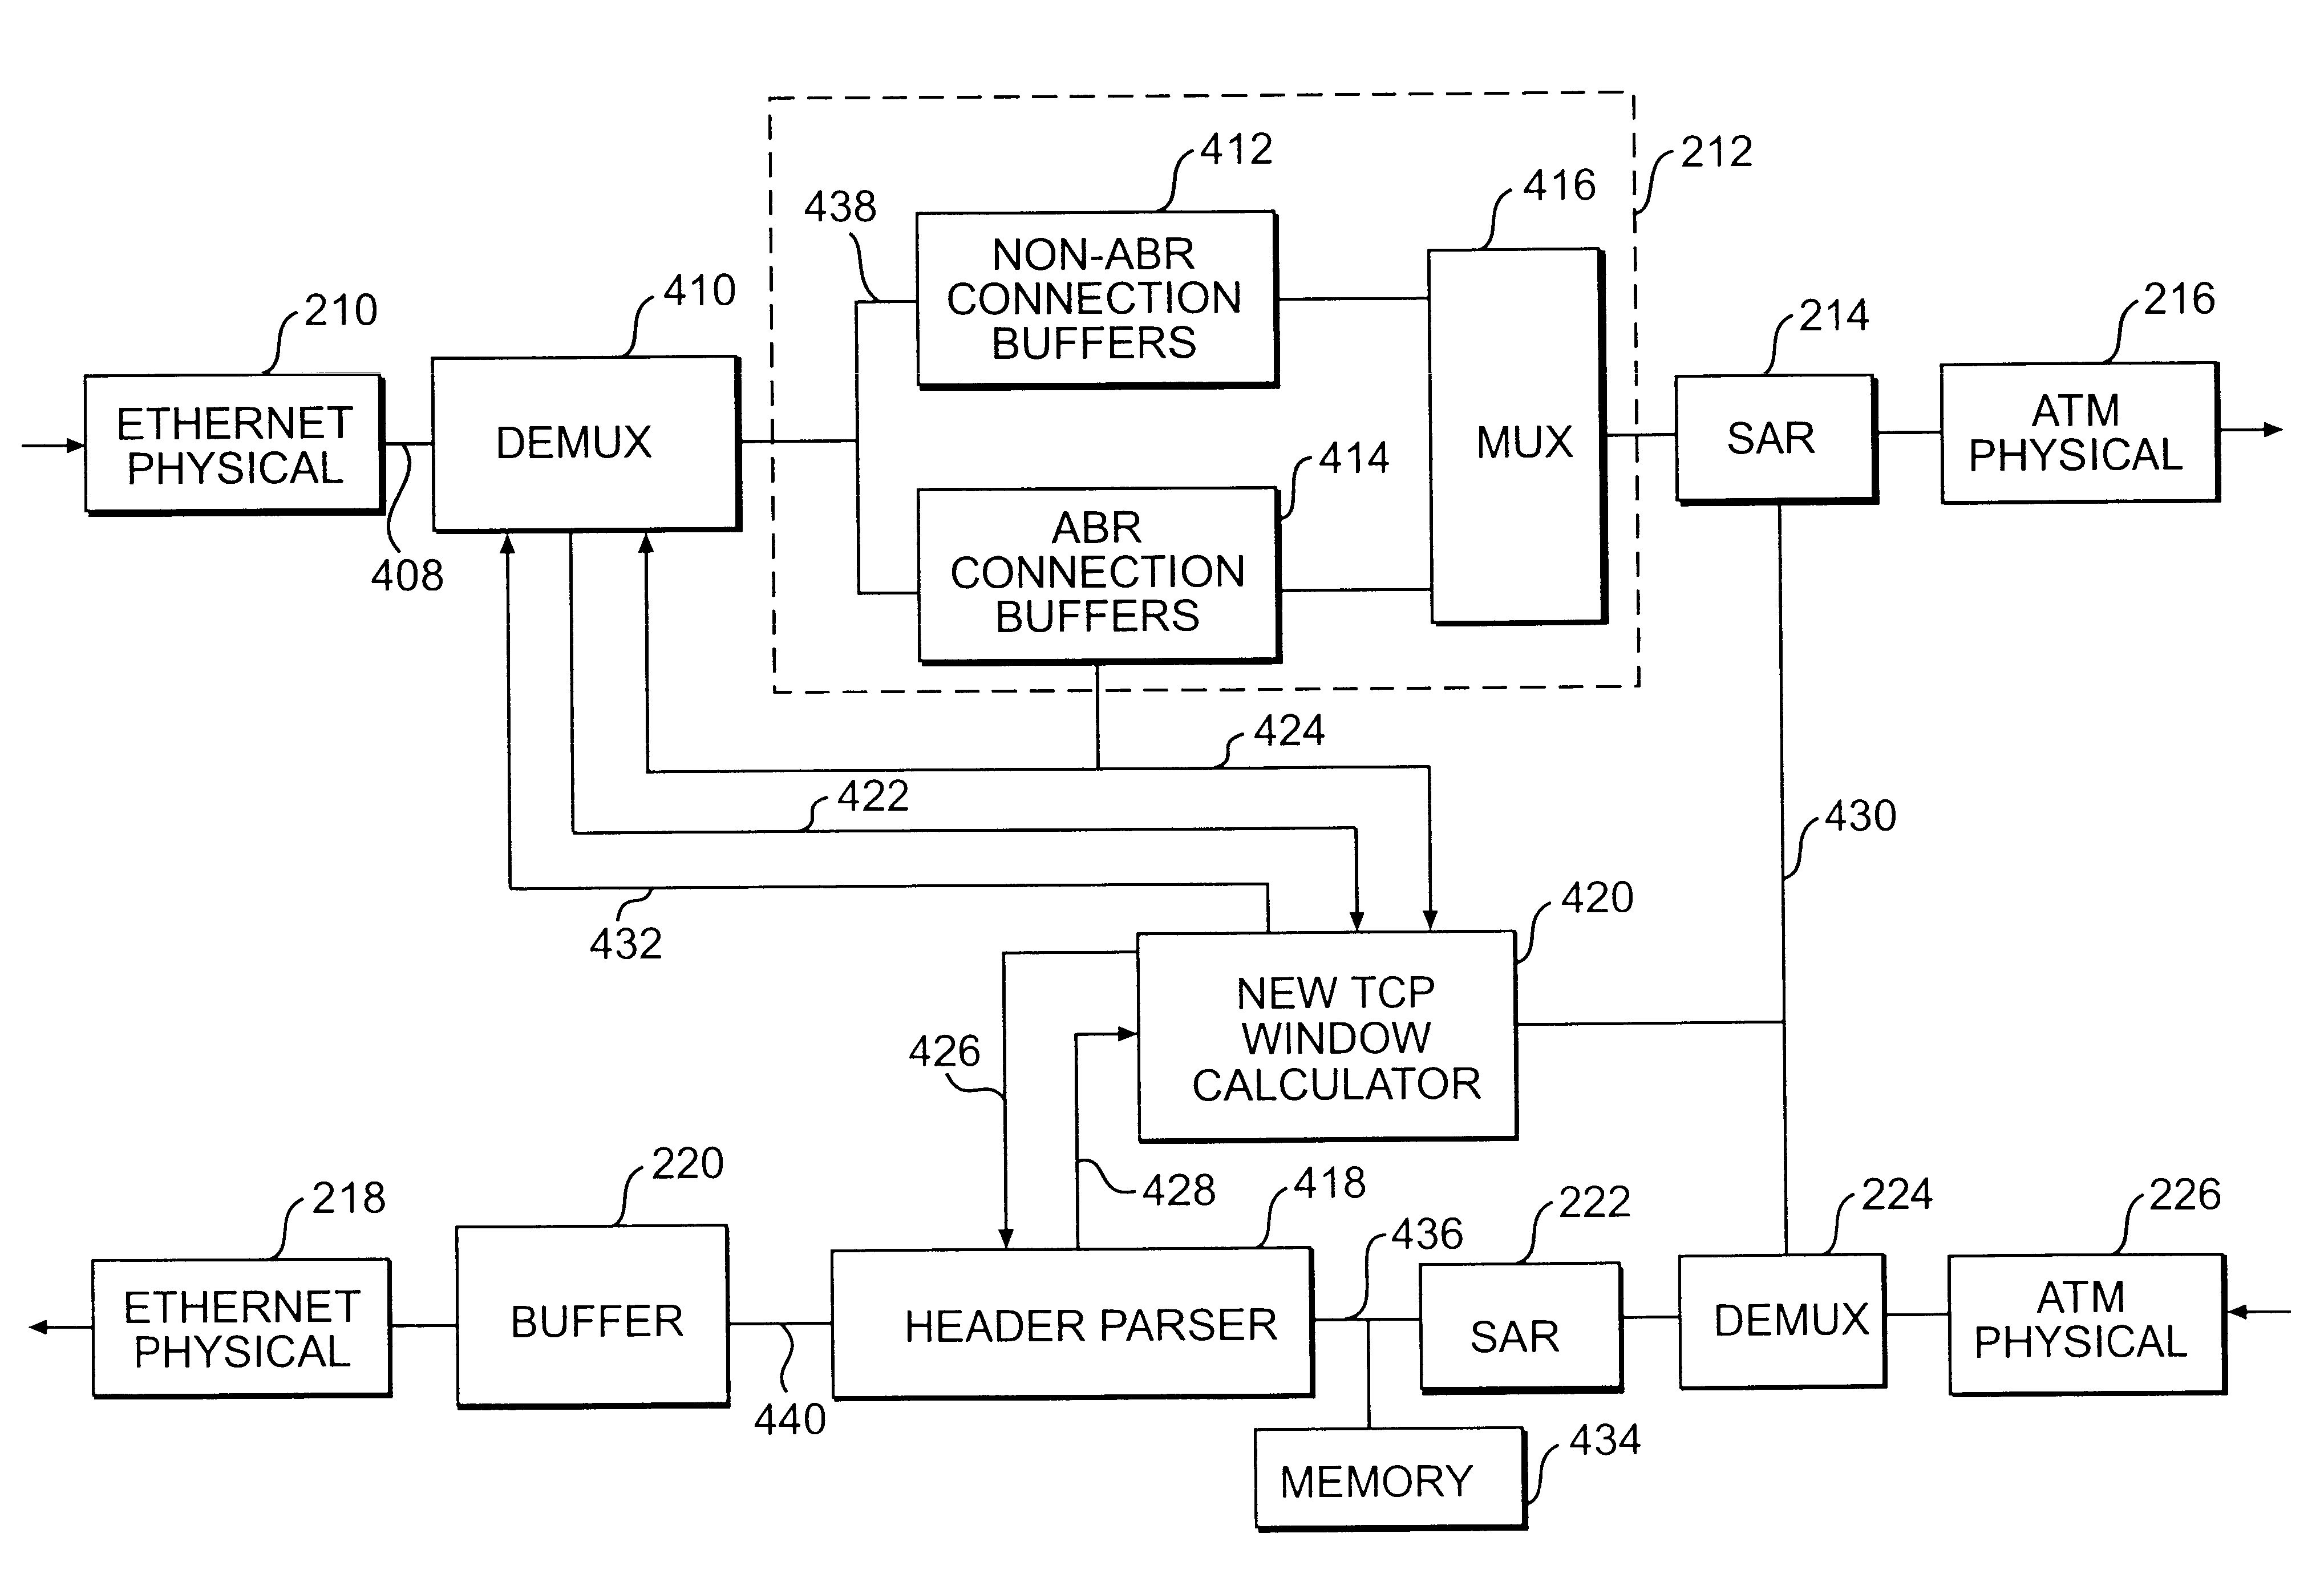 Apparatus and method for optimizing congestion control information in a multi-protocol network